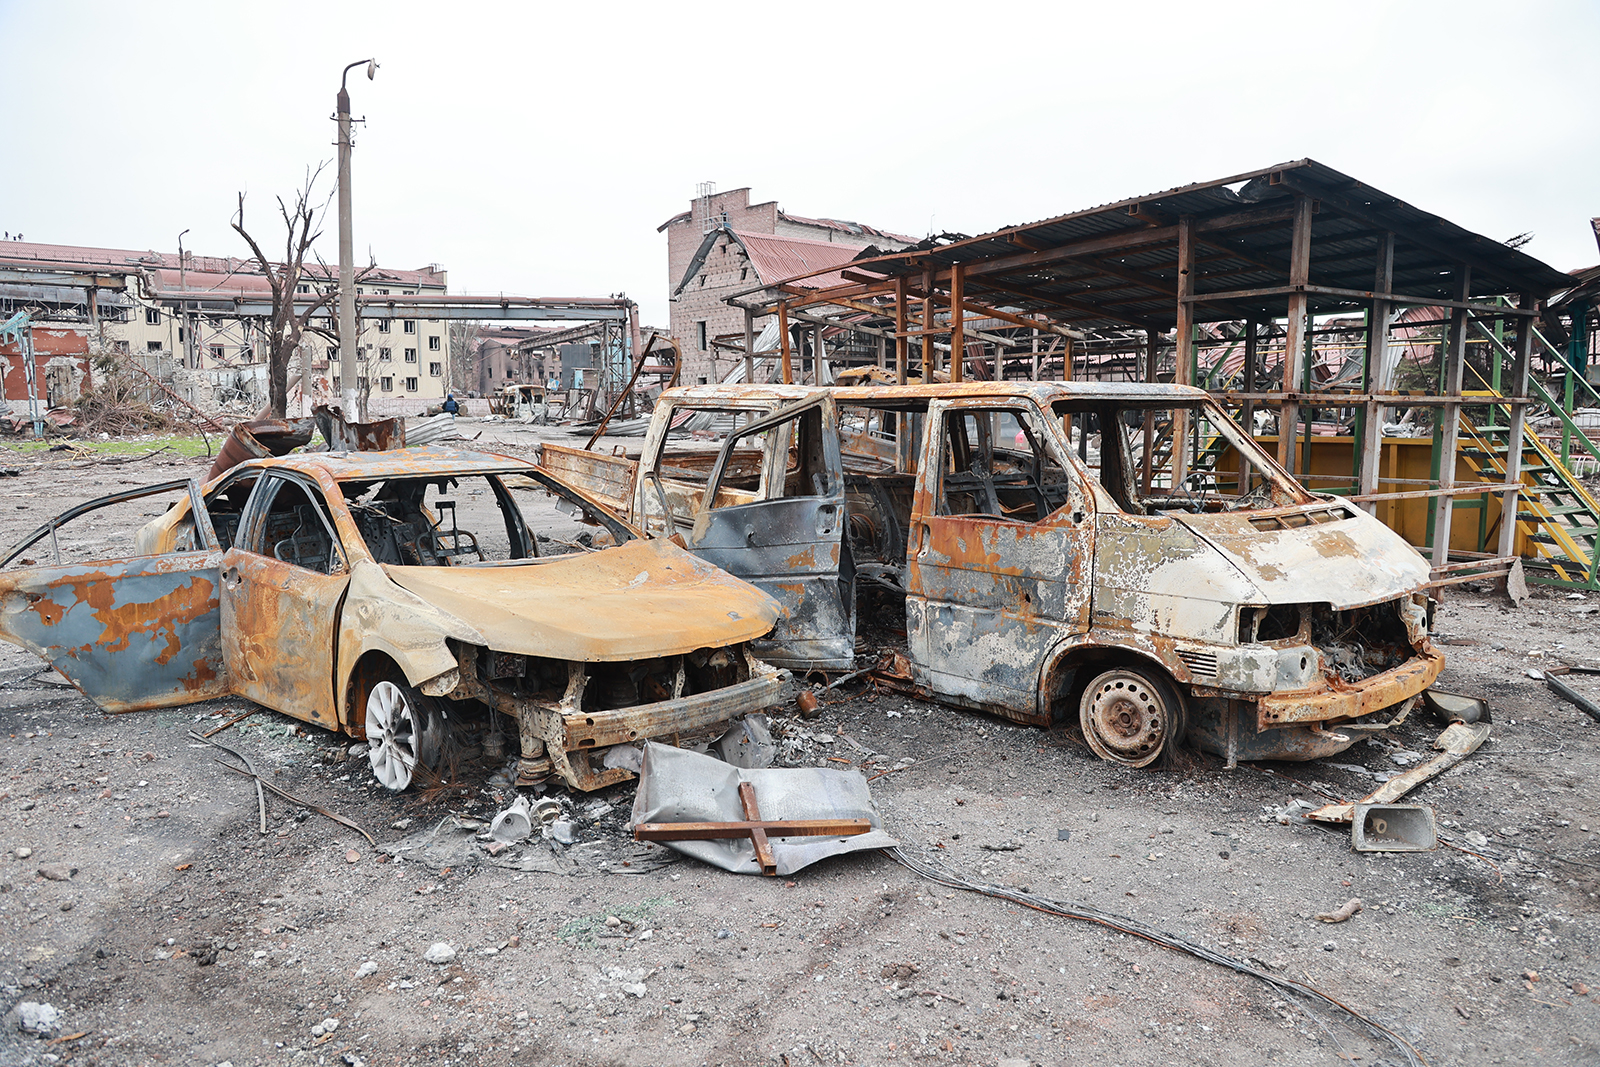 A view of damage in the Ukrainian city of Mariupol under the control of Russian military and pro-Russian separatists, on April 17.